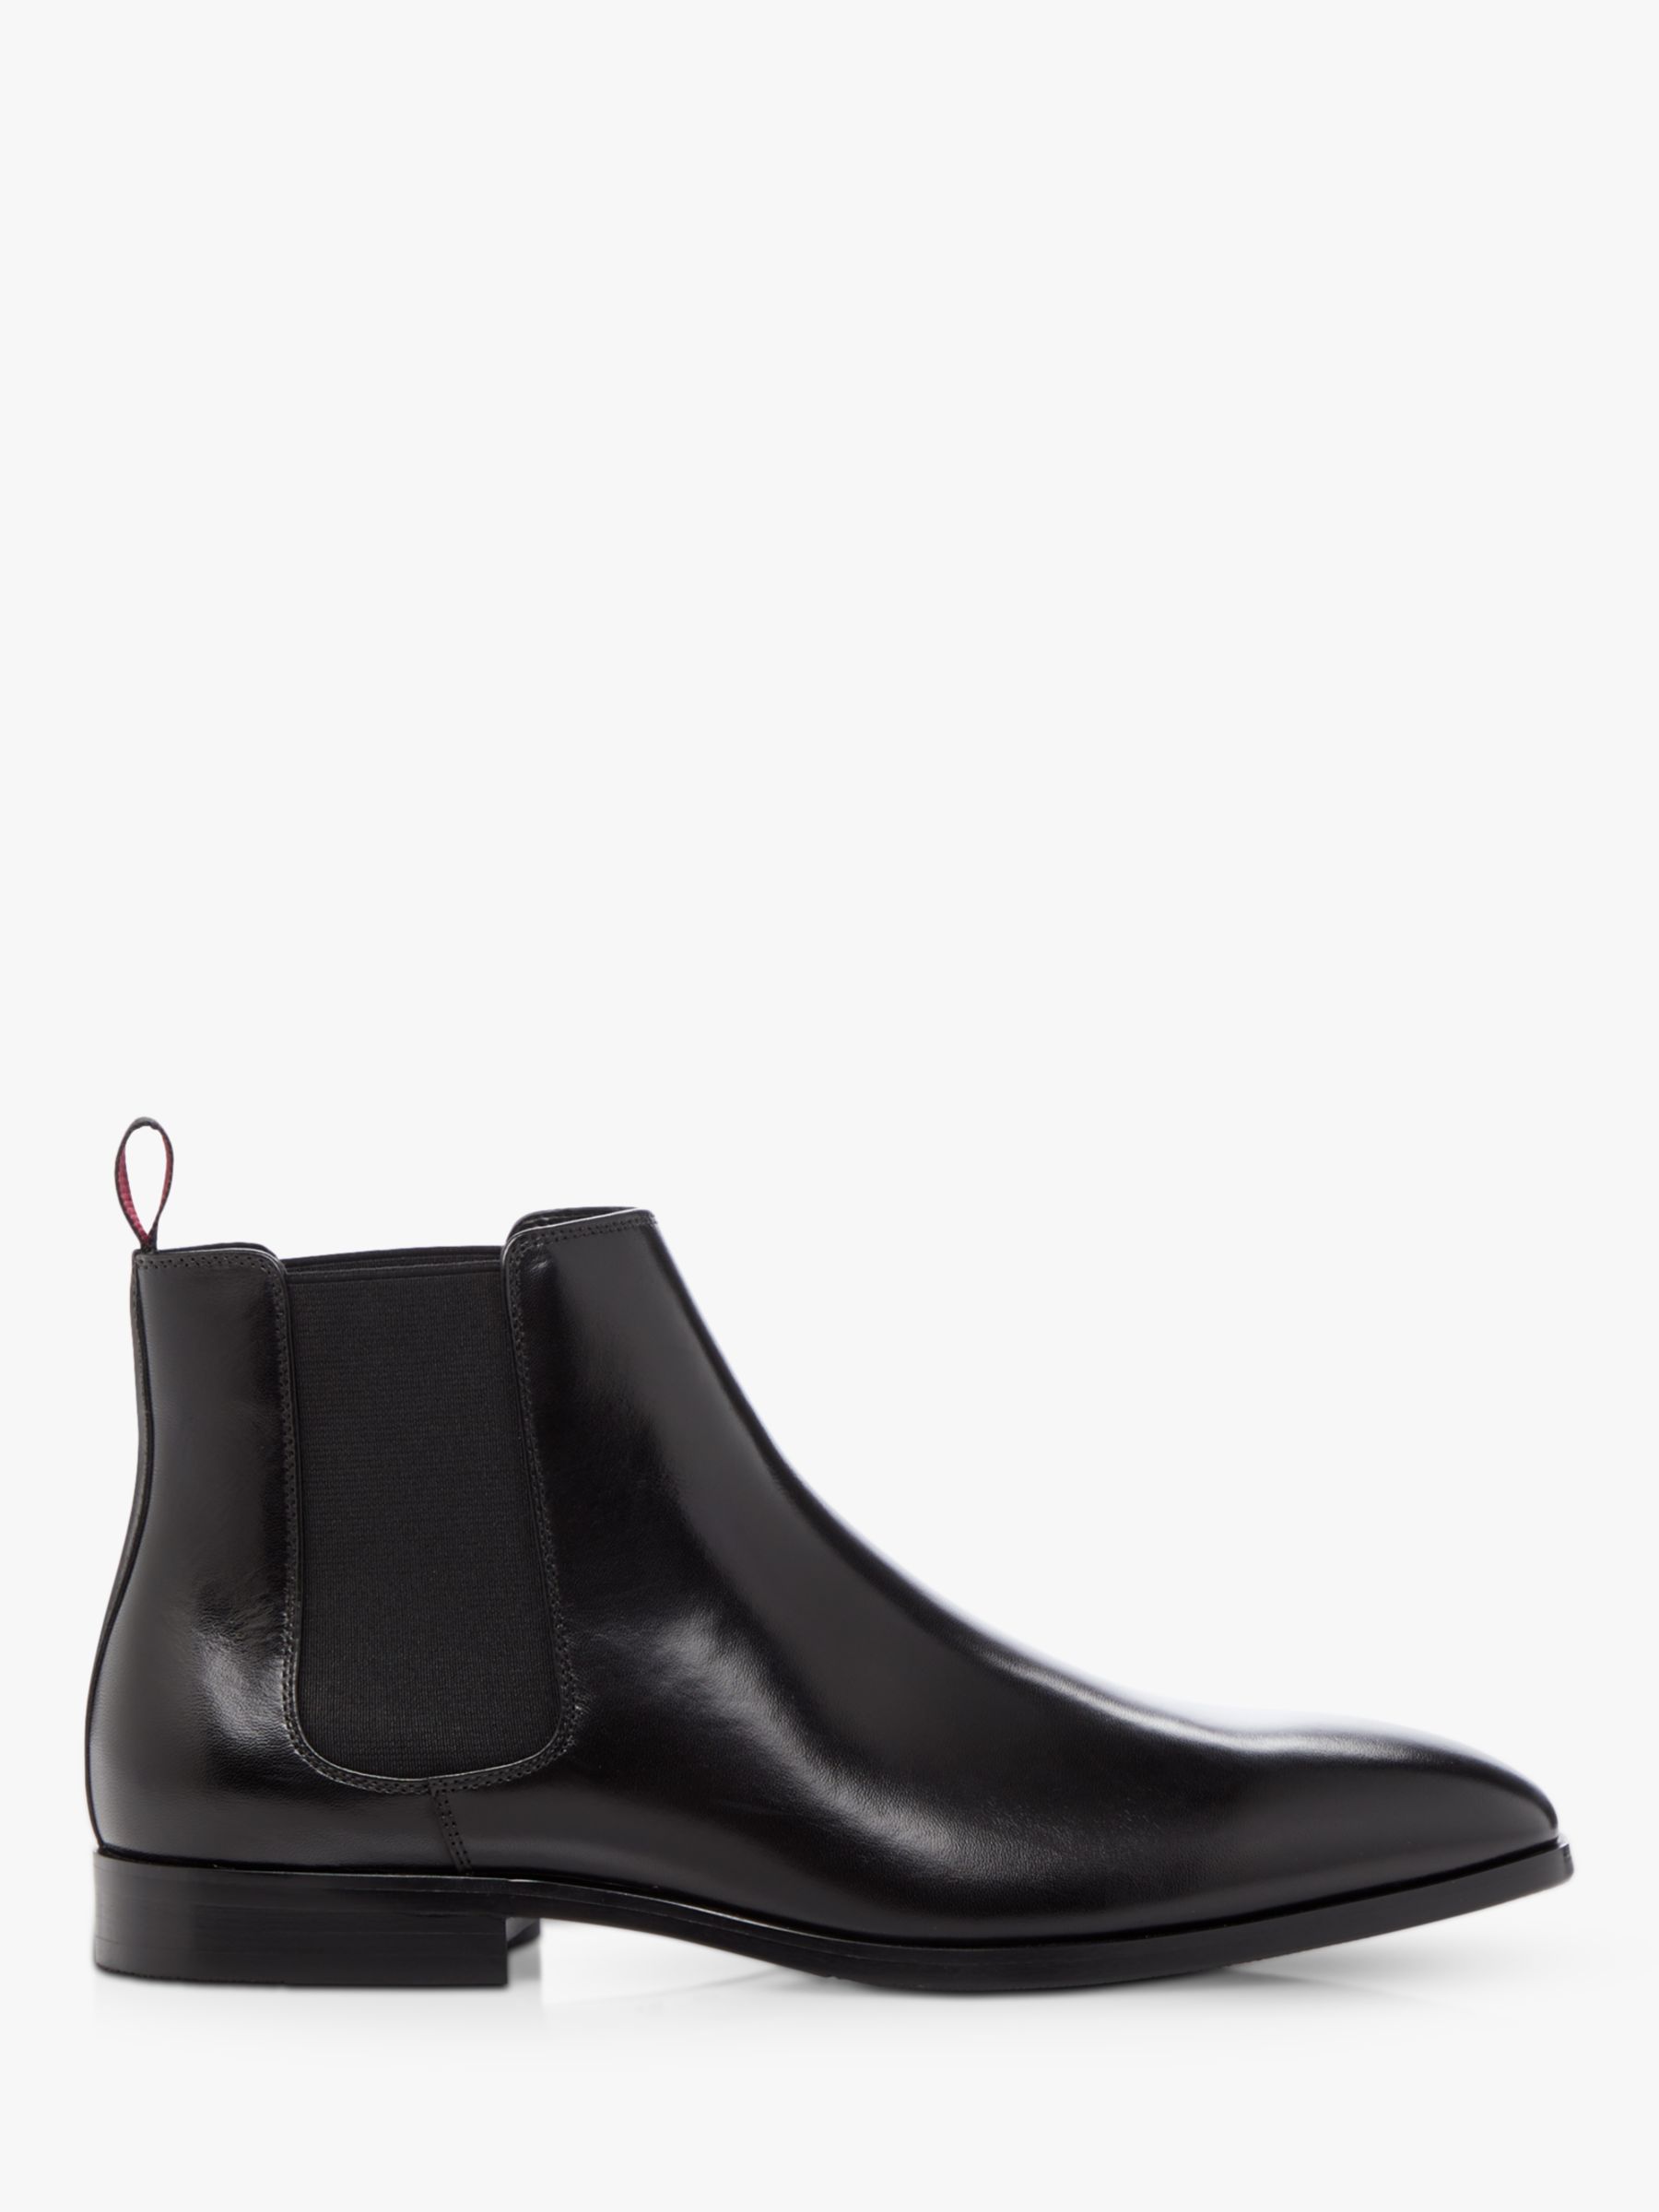 Dune Mantle Leather Chelsea Boots, Black at John Lewis & Partners